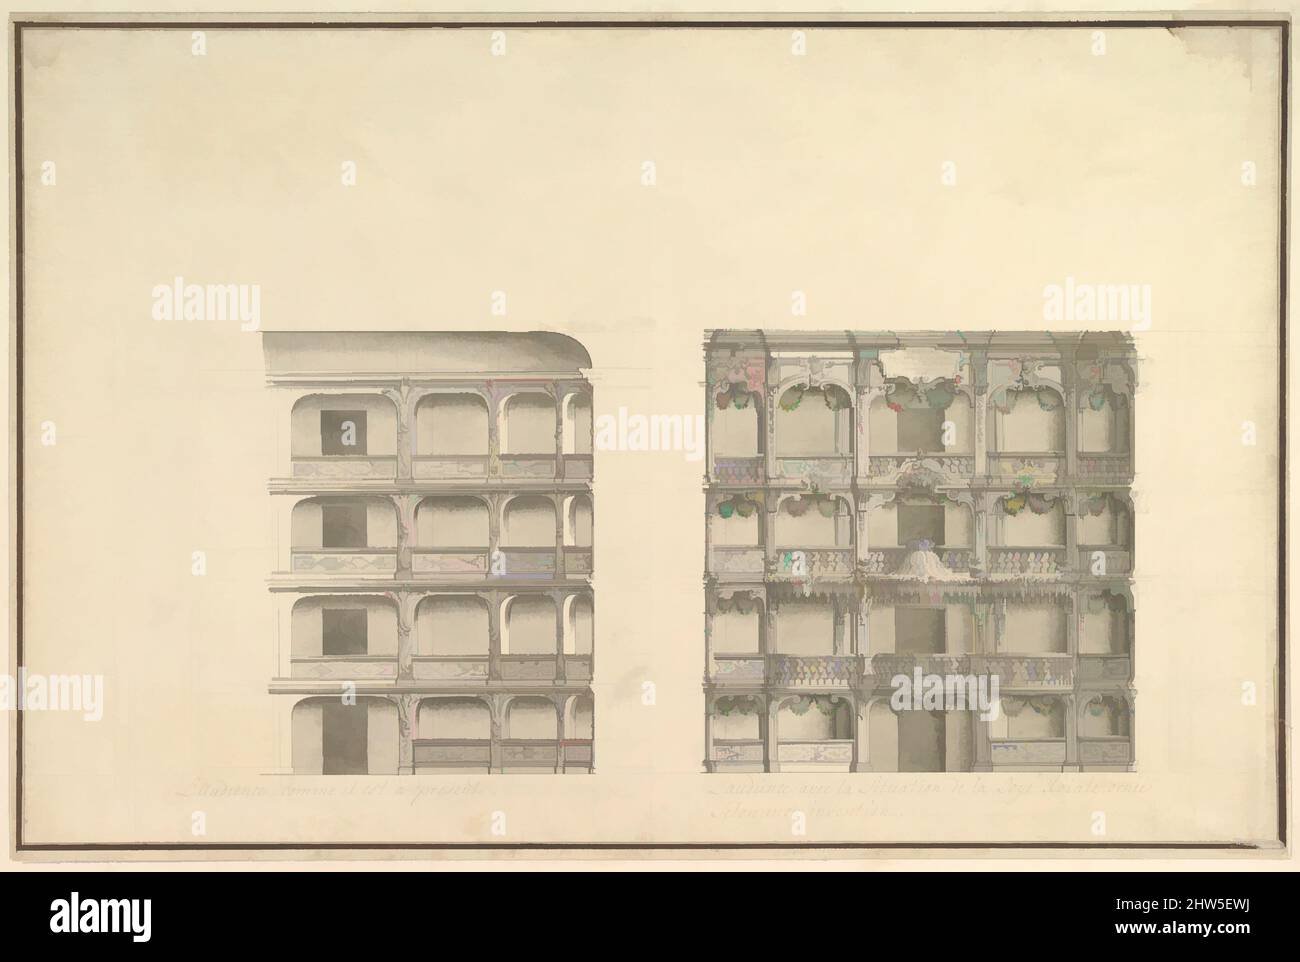 Art inspired by Elevation of Boxes and Royal Box as Presently Constituted and According to New Design, ca. 1750, Pen, grey ink and wash over pencil with color for garlands above royal box, 16-1/8 x 24-3/8 in. (41.0 x 61.9 cm), Drawings, Workshop of Giuseppe Galli Bibiena (Italian, Classic works modernized by Artotop with a splash of modernity. Shapes, color and value, eye-catching visual impact on art. Emotions through freedom of artworks in a contemporary way. A timeless message pursuing a wildly creative new direction. Artists turning to the digital medium and creating the Artotop NFT Stock Photo